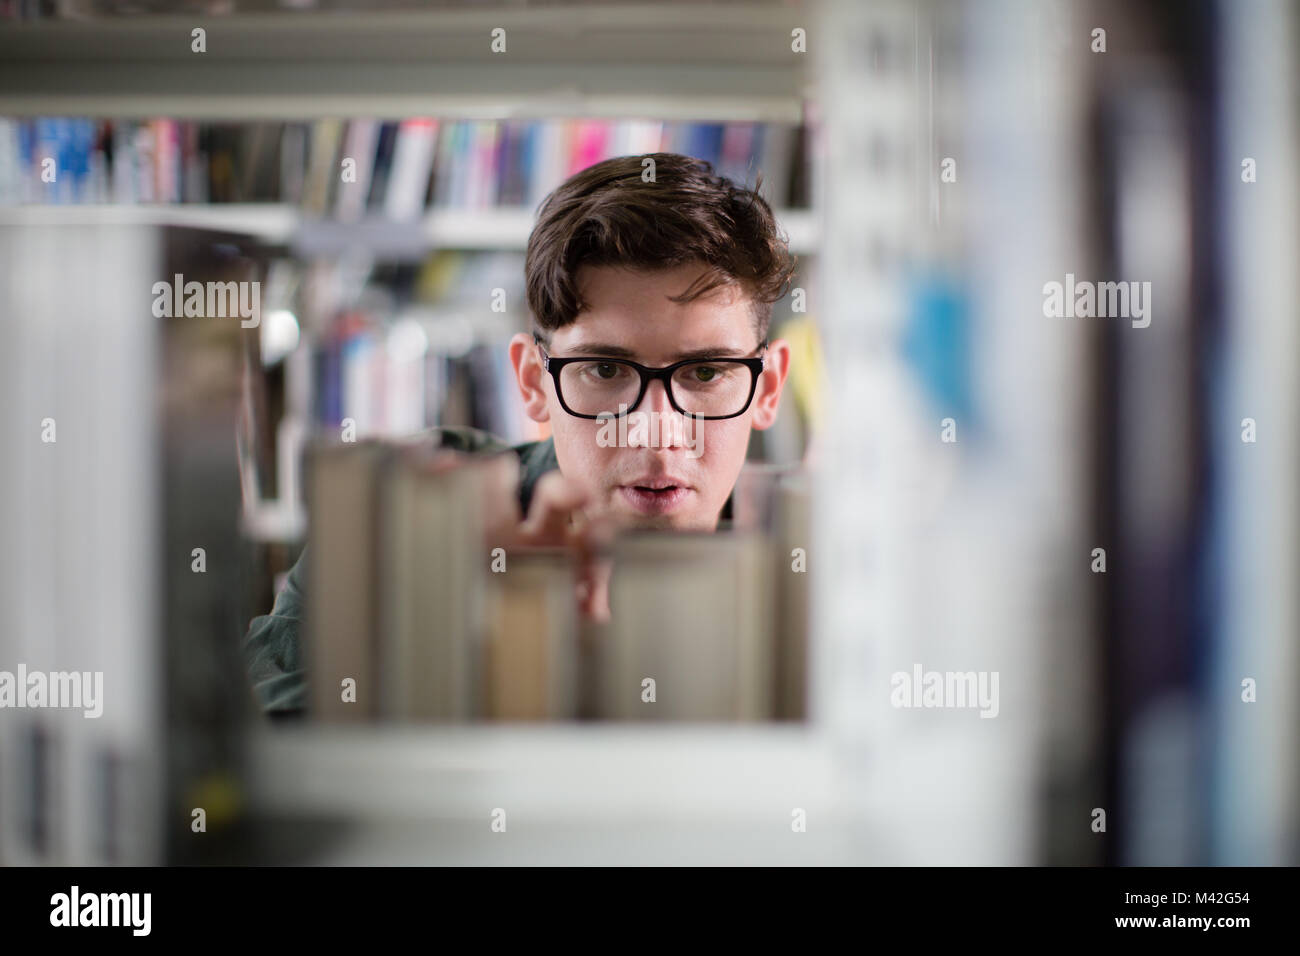 Student looking for a book in library Stock Photo